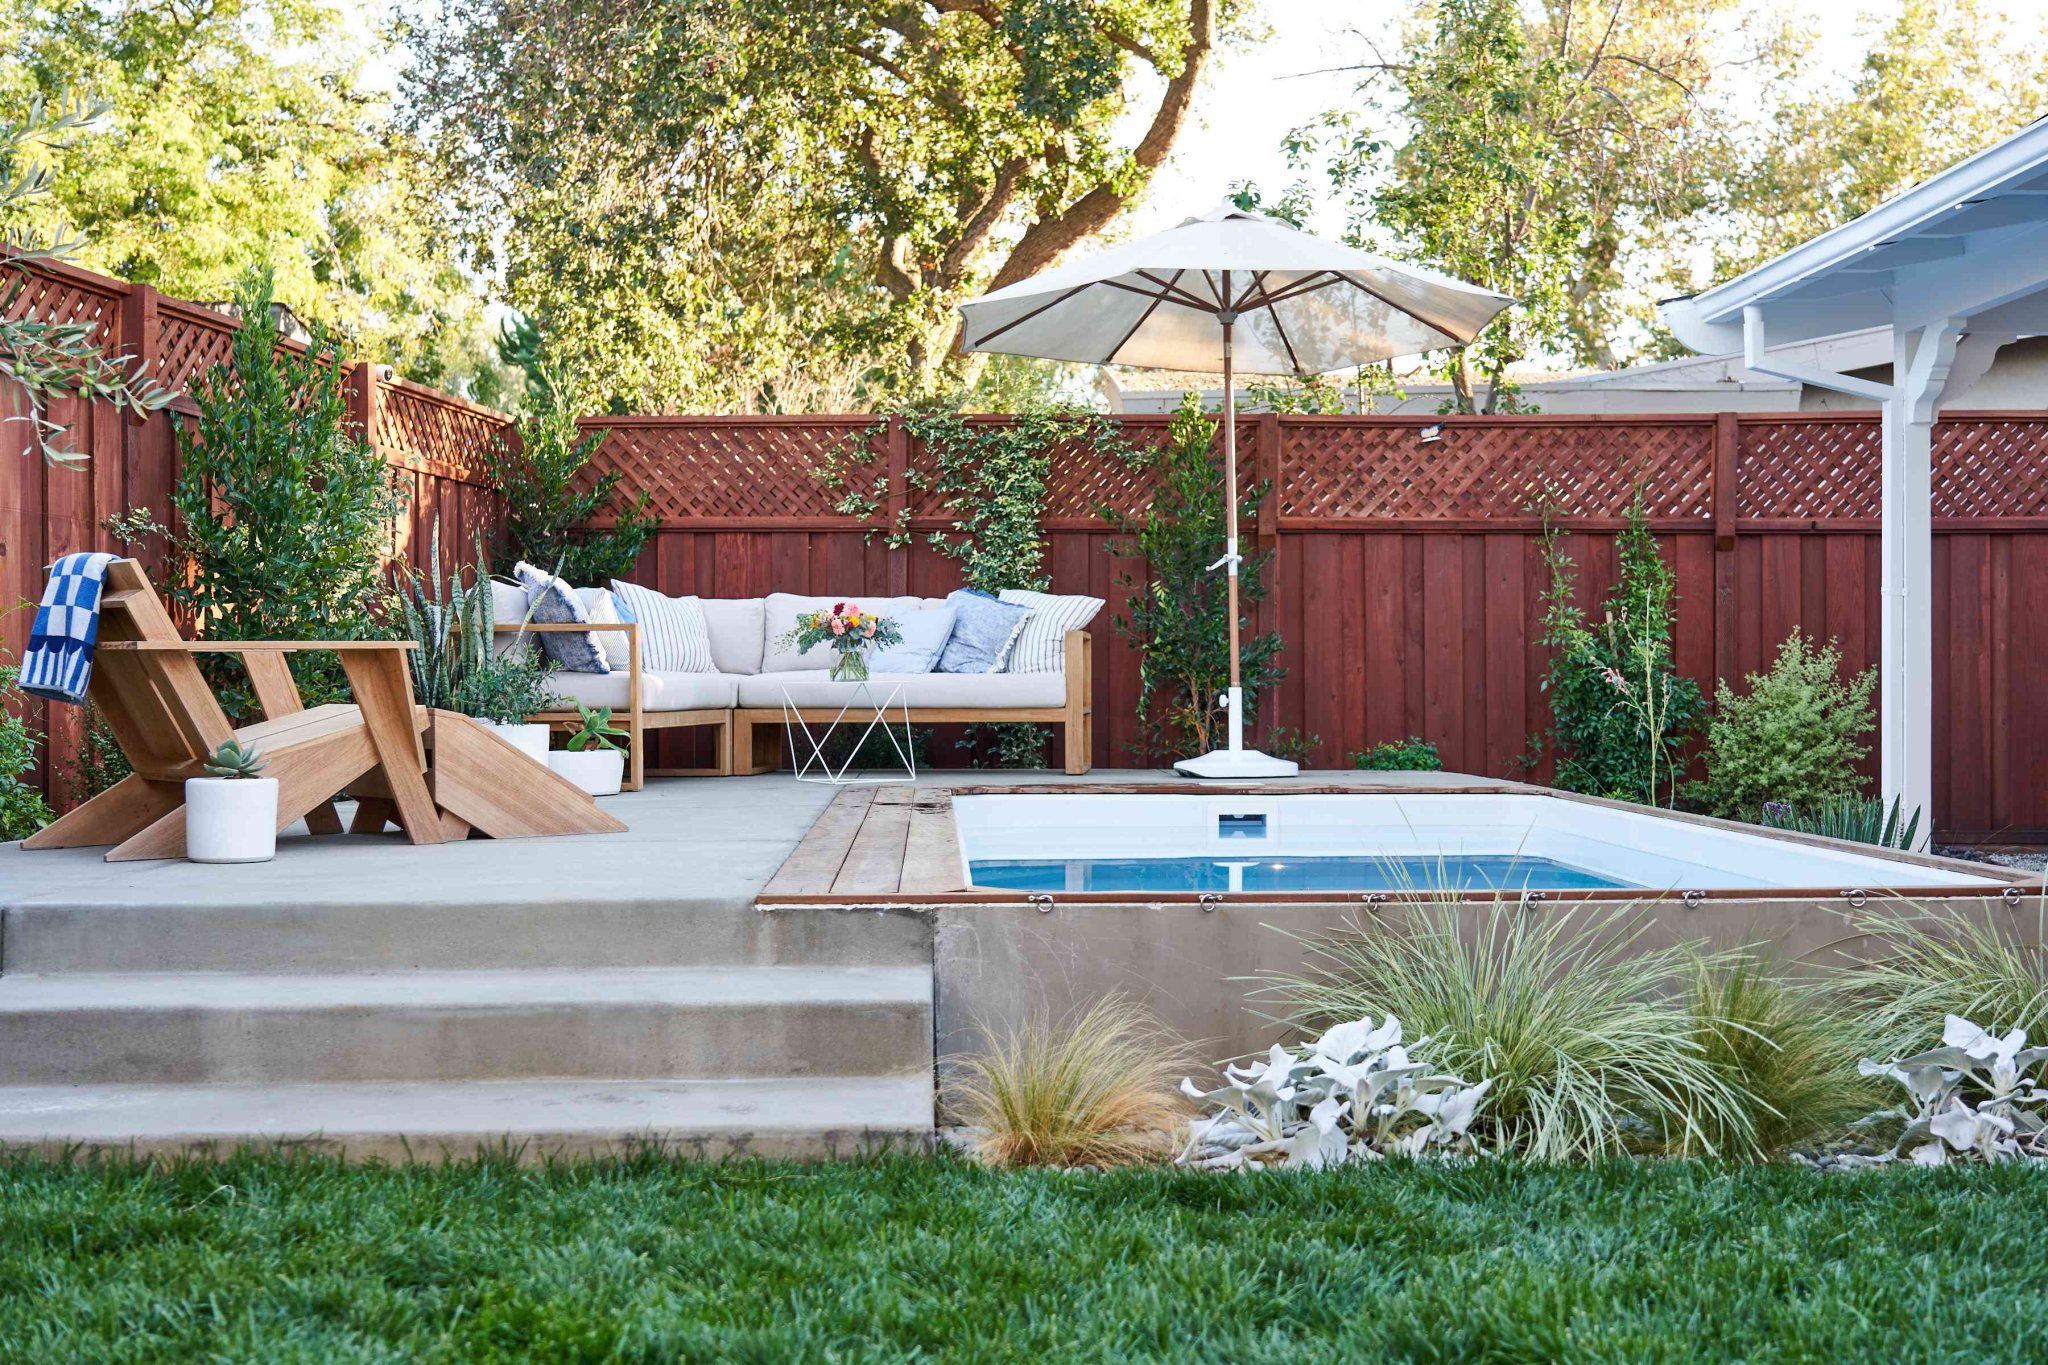 16 Easy Ways to Block a Neighbor's View of Your Yard